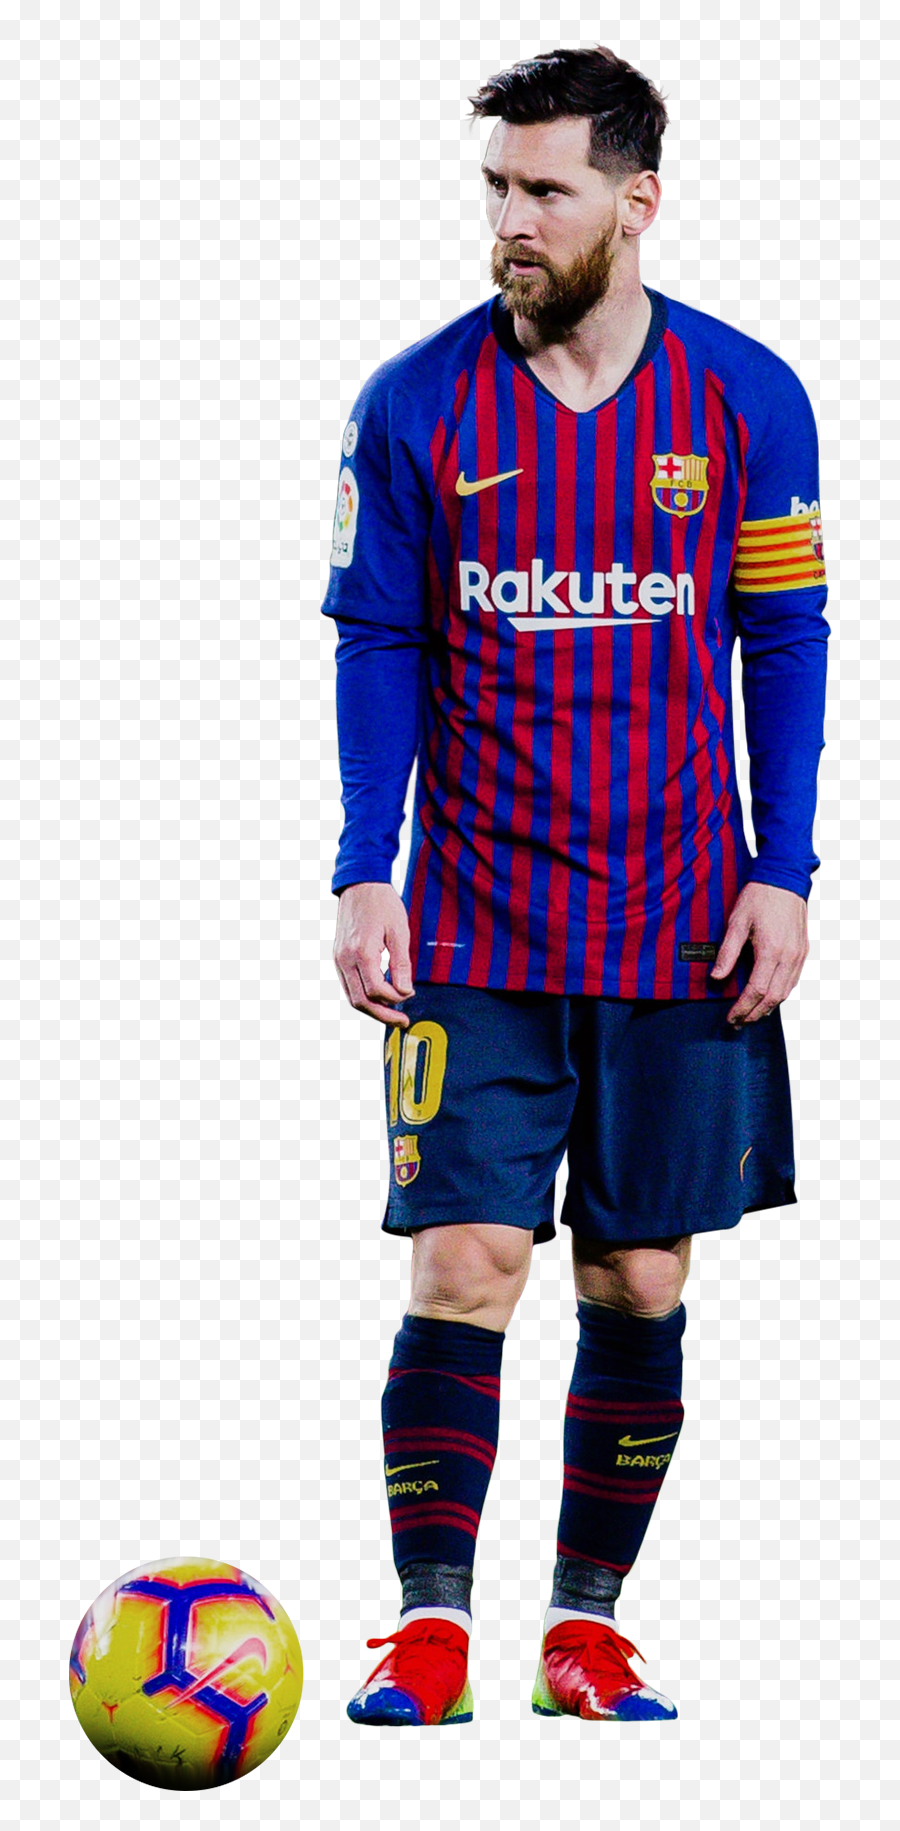 Lionel Messi Png Free Download For - Messi,Messi Png